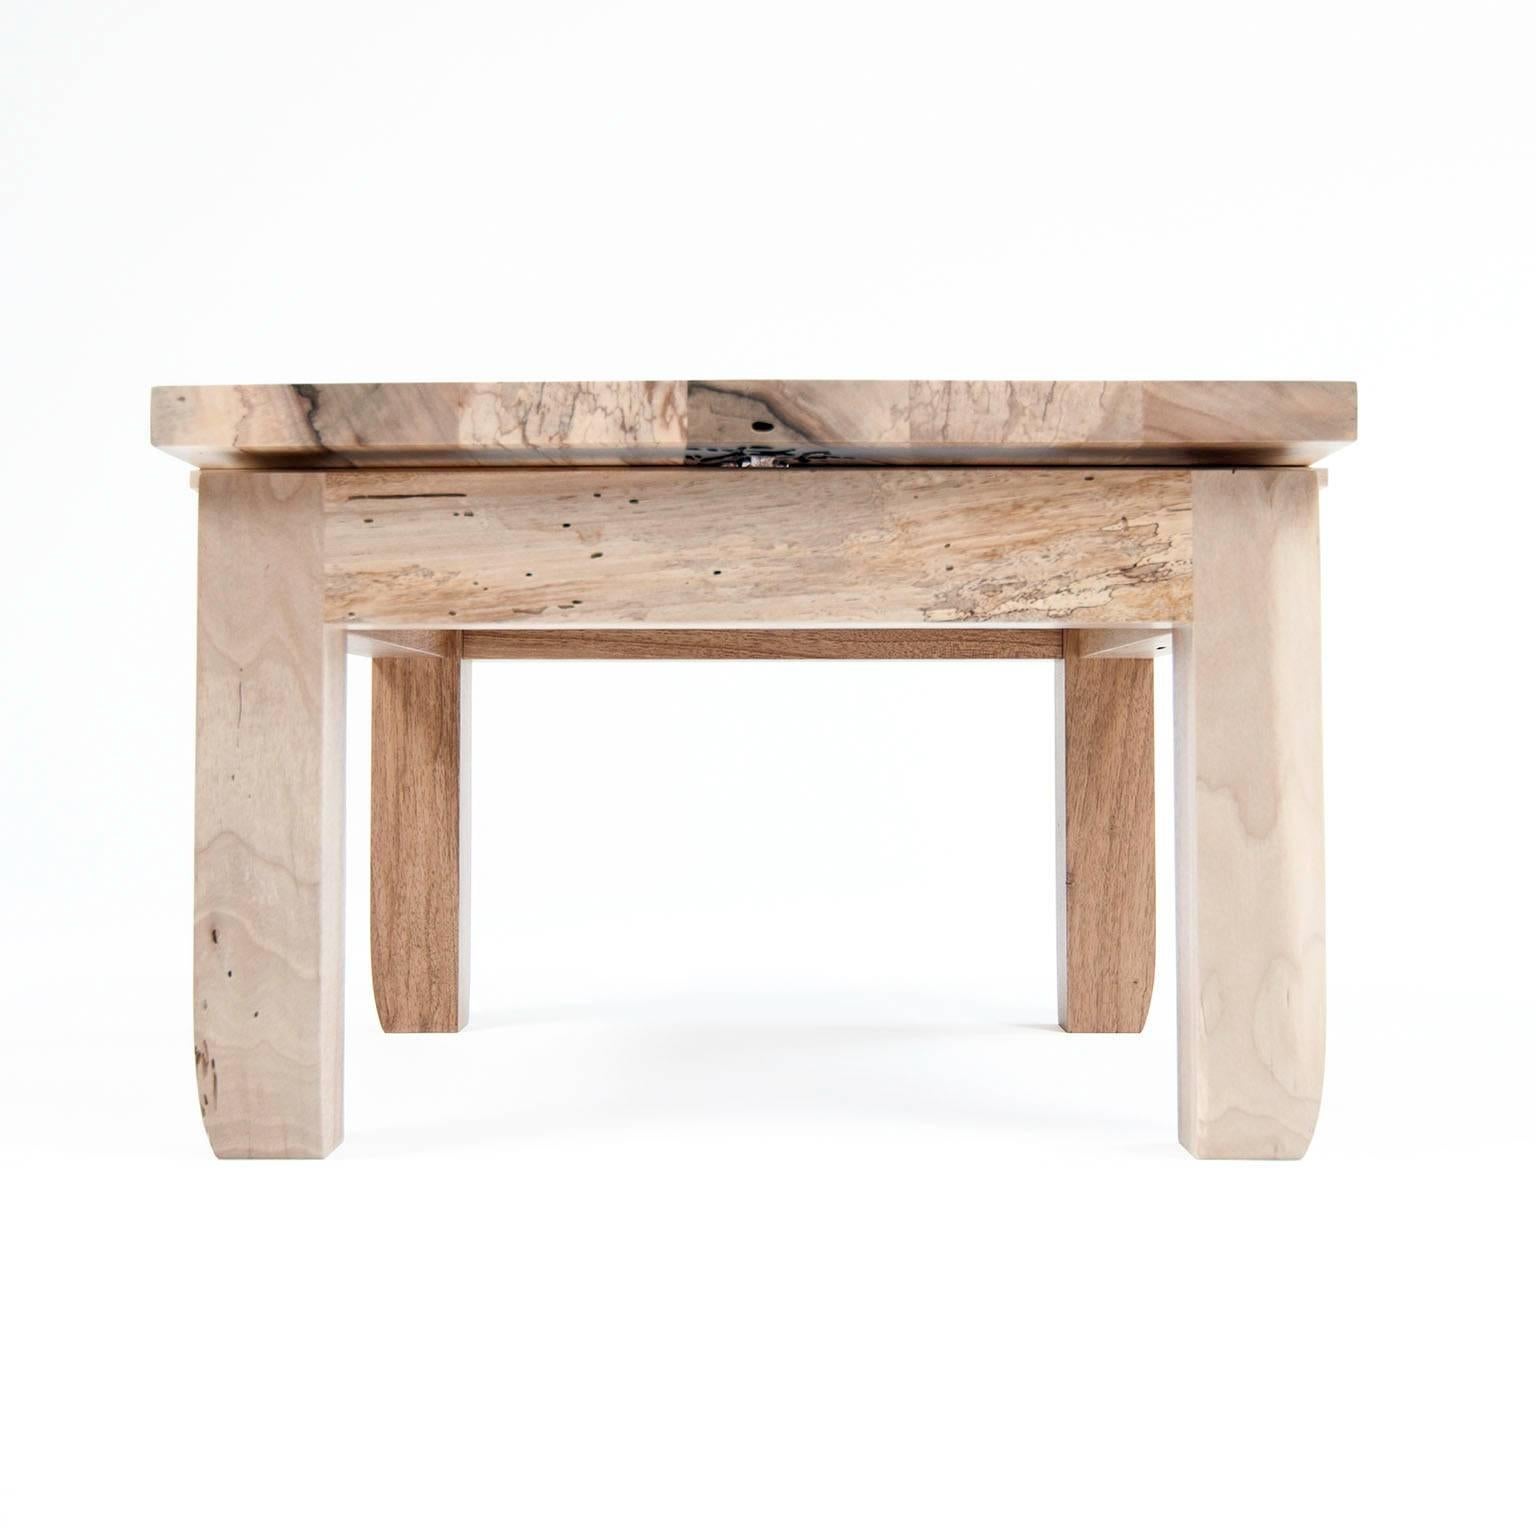 Modern Contemporary English Walnut Hardwood Low Prayer Stools Made in Brooklyn in Stock For Sale